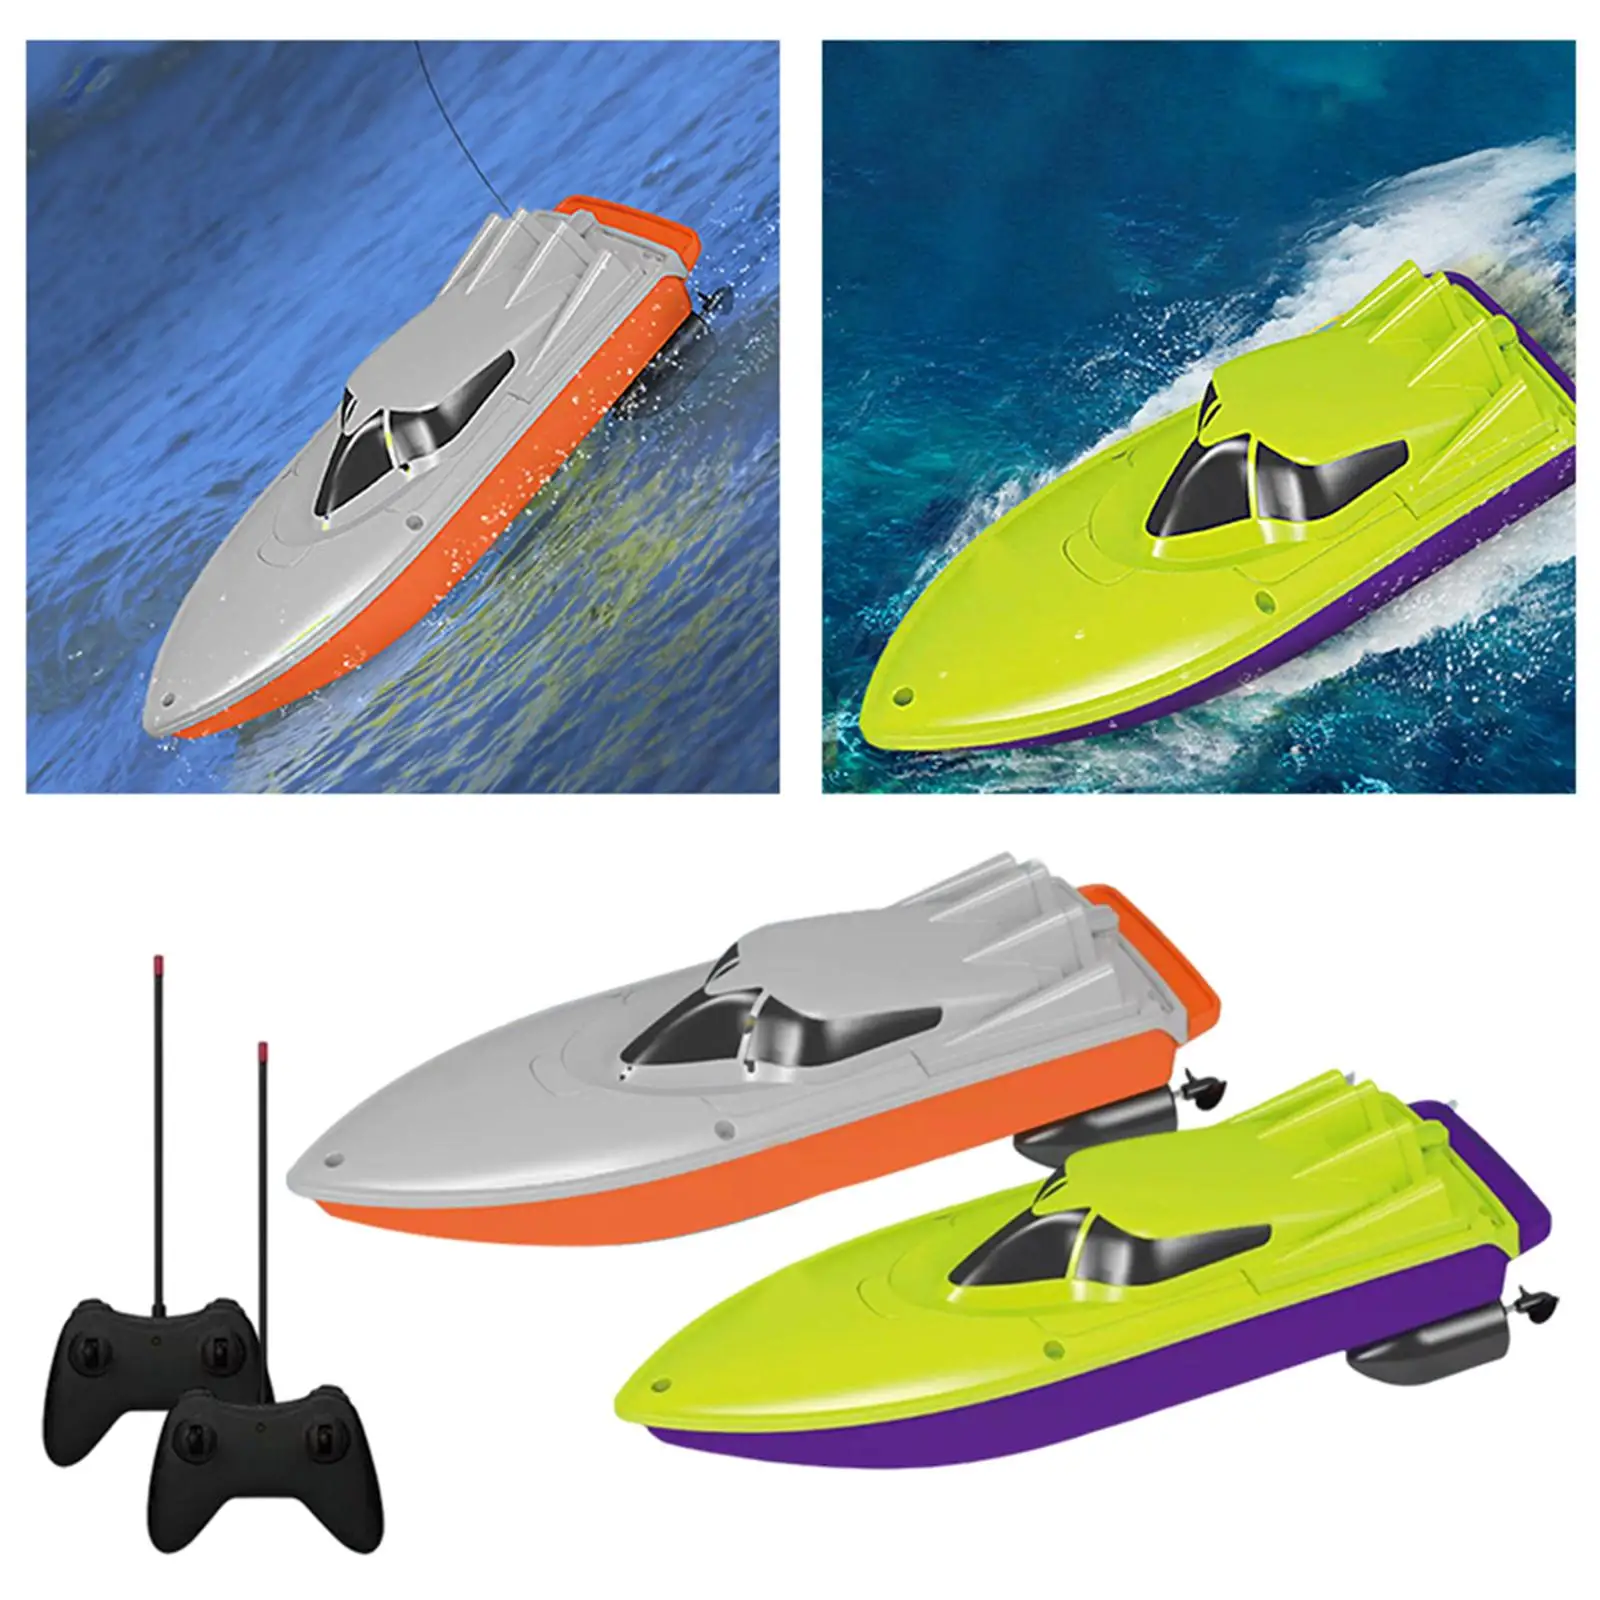 2.4G Remote Control Boat Fast RC Race Boat High Speed for River, Lakes,